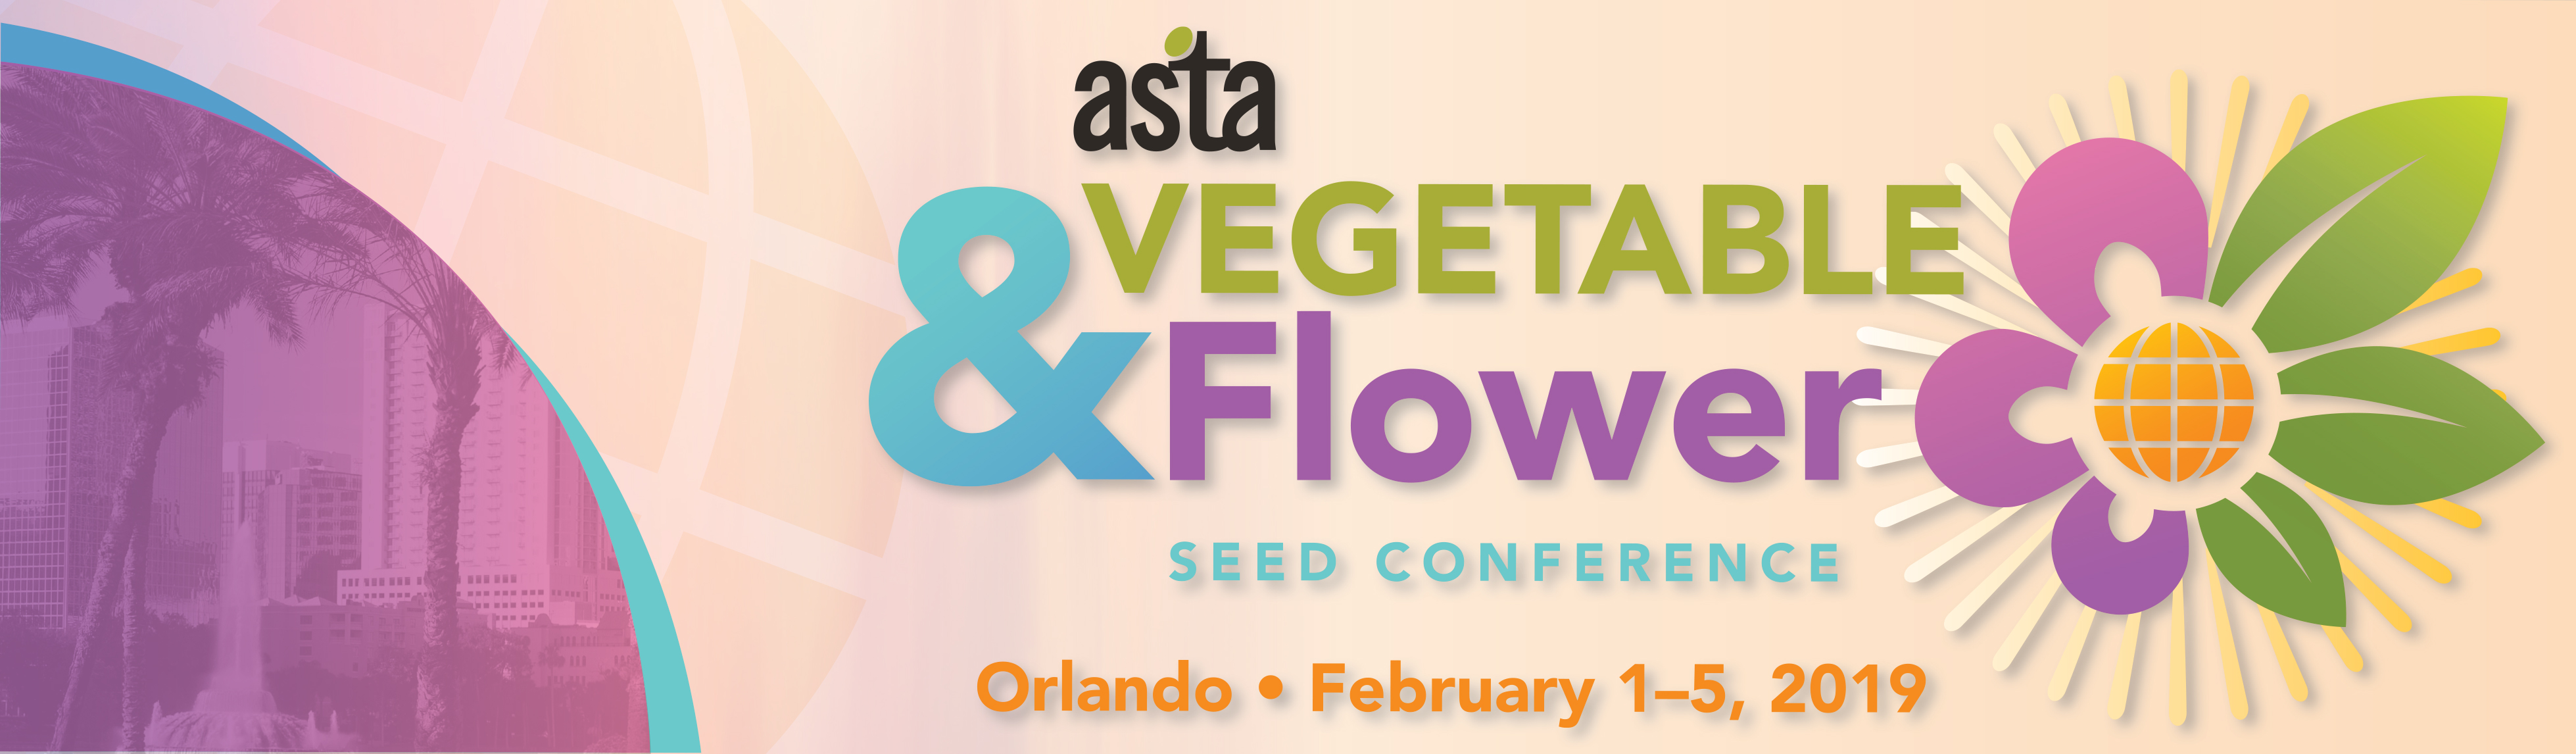 Vegetable & Flower Seed Conference